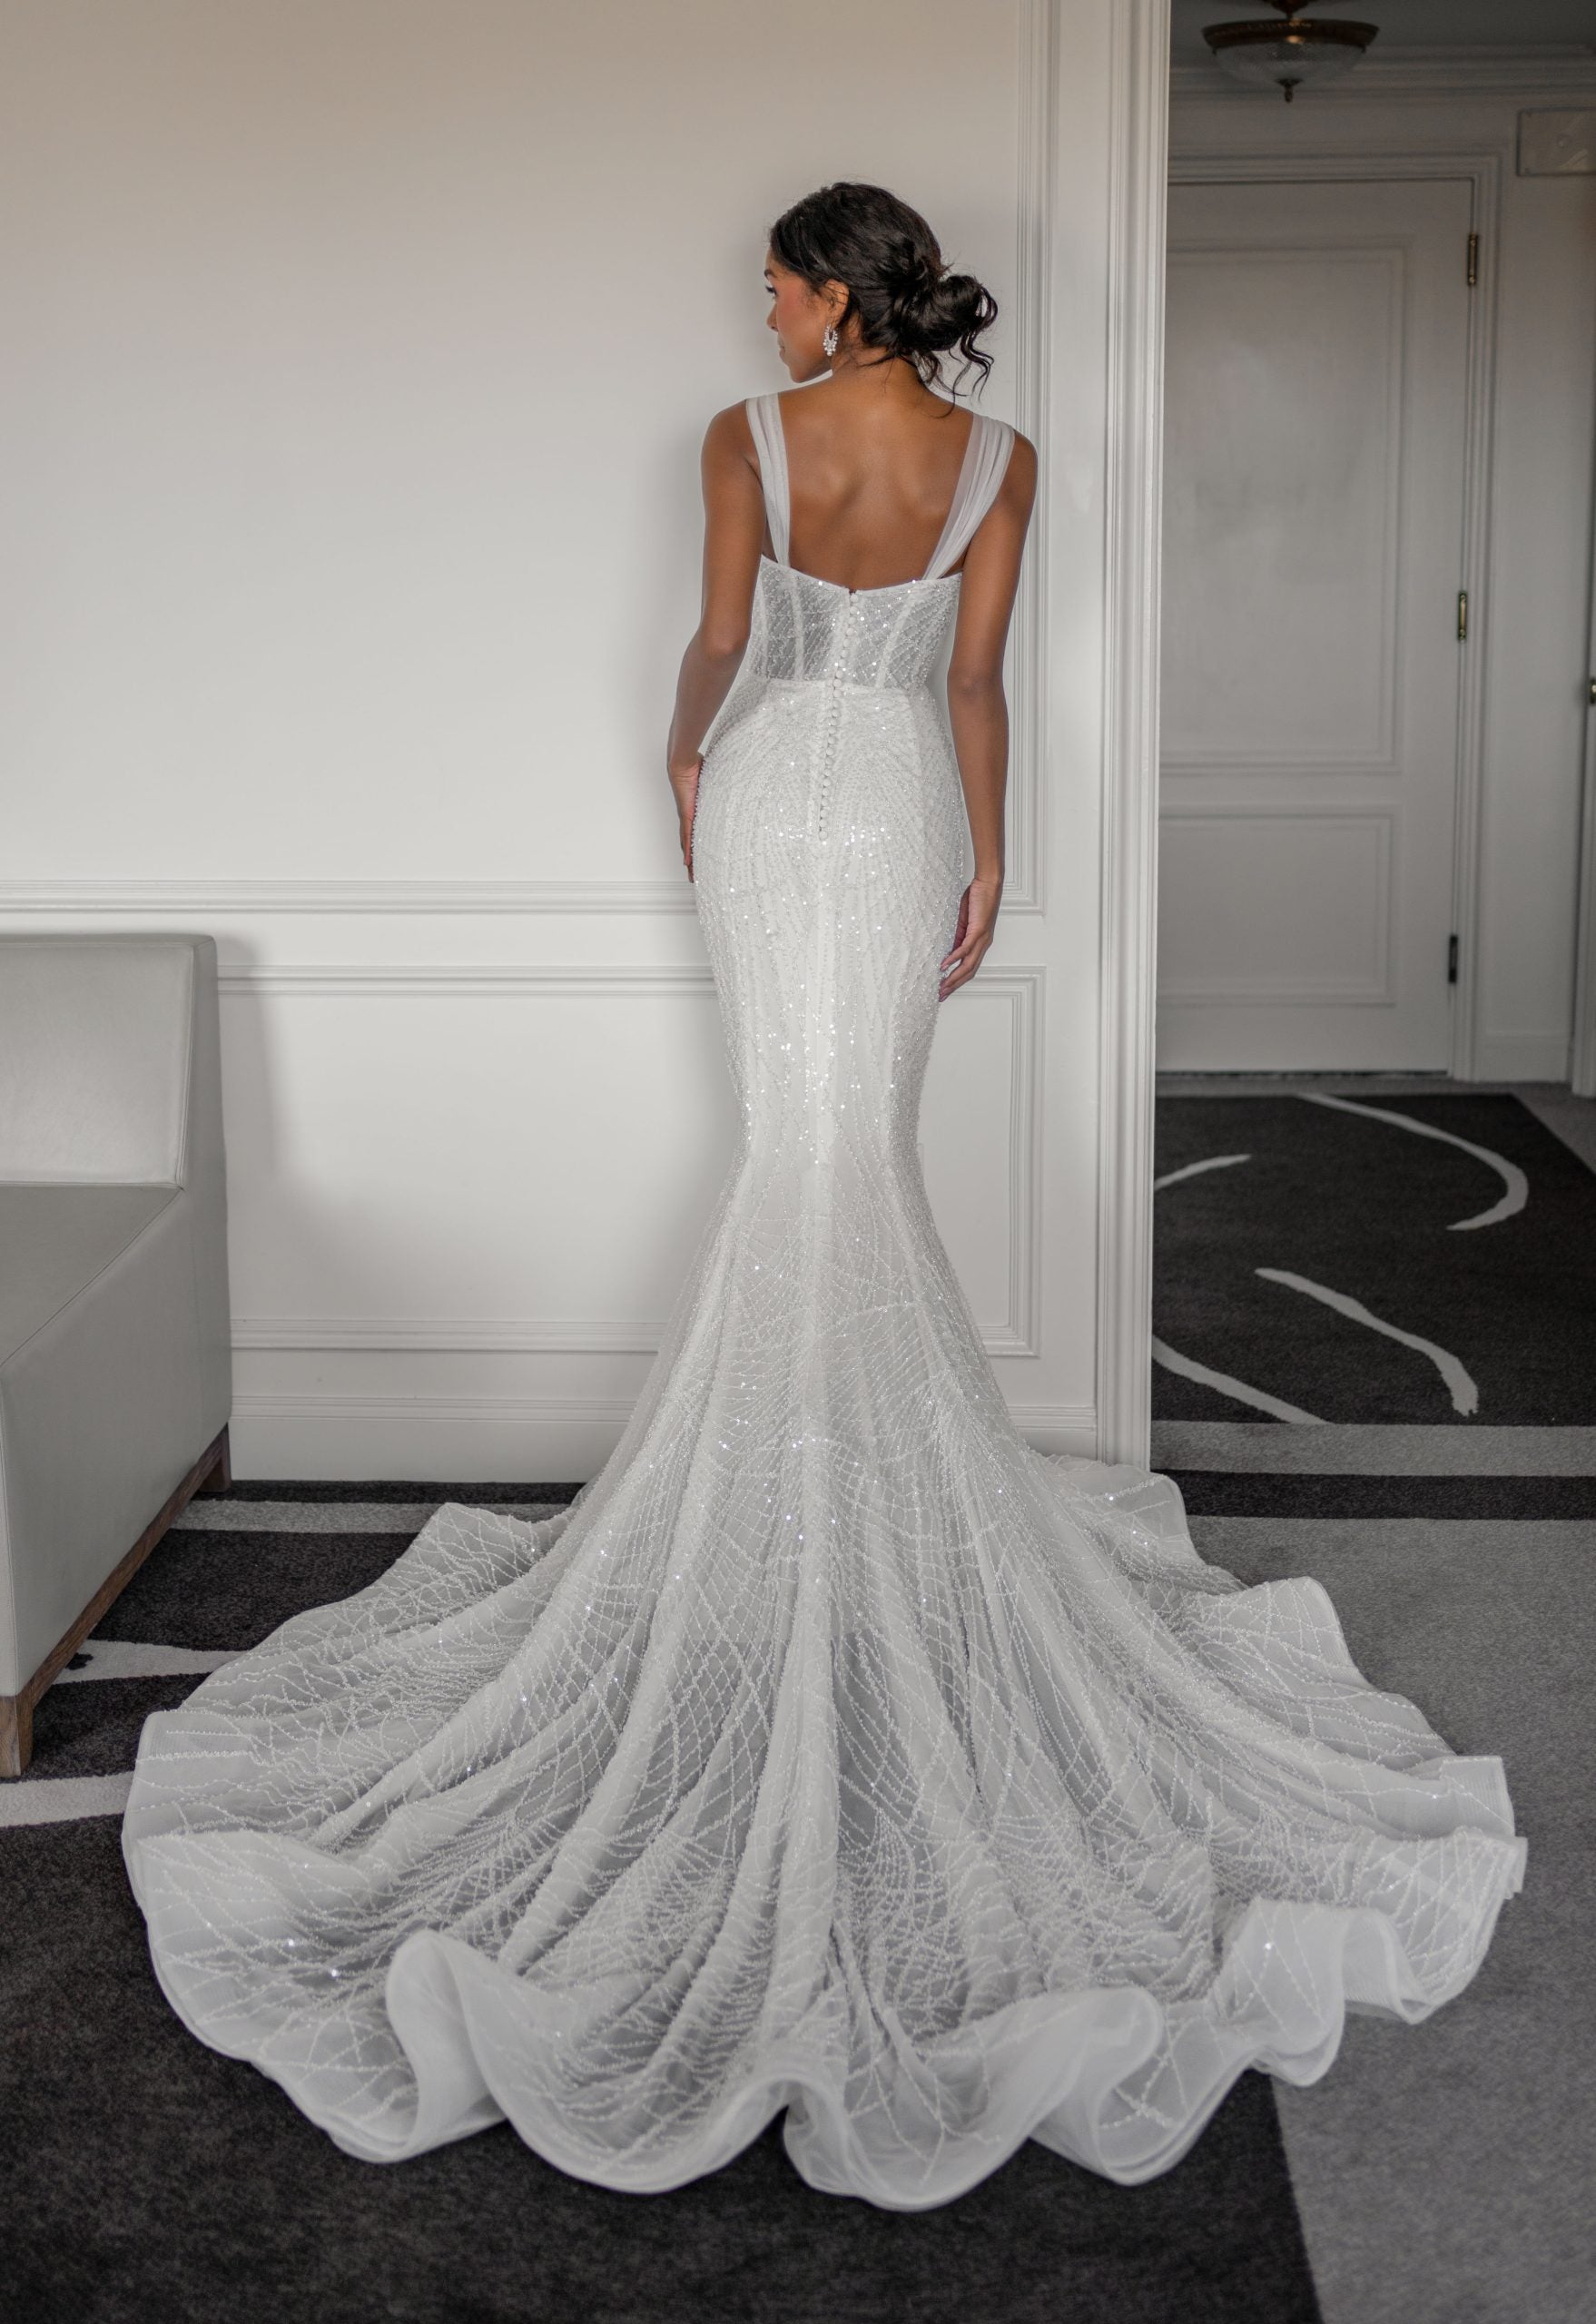 Modern Beaded Fit-and-Flare Gown by Blanche Bridal - Image 2